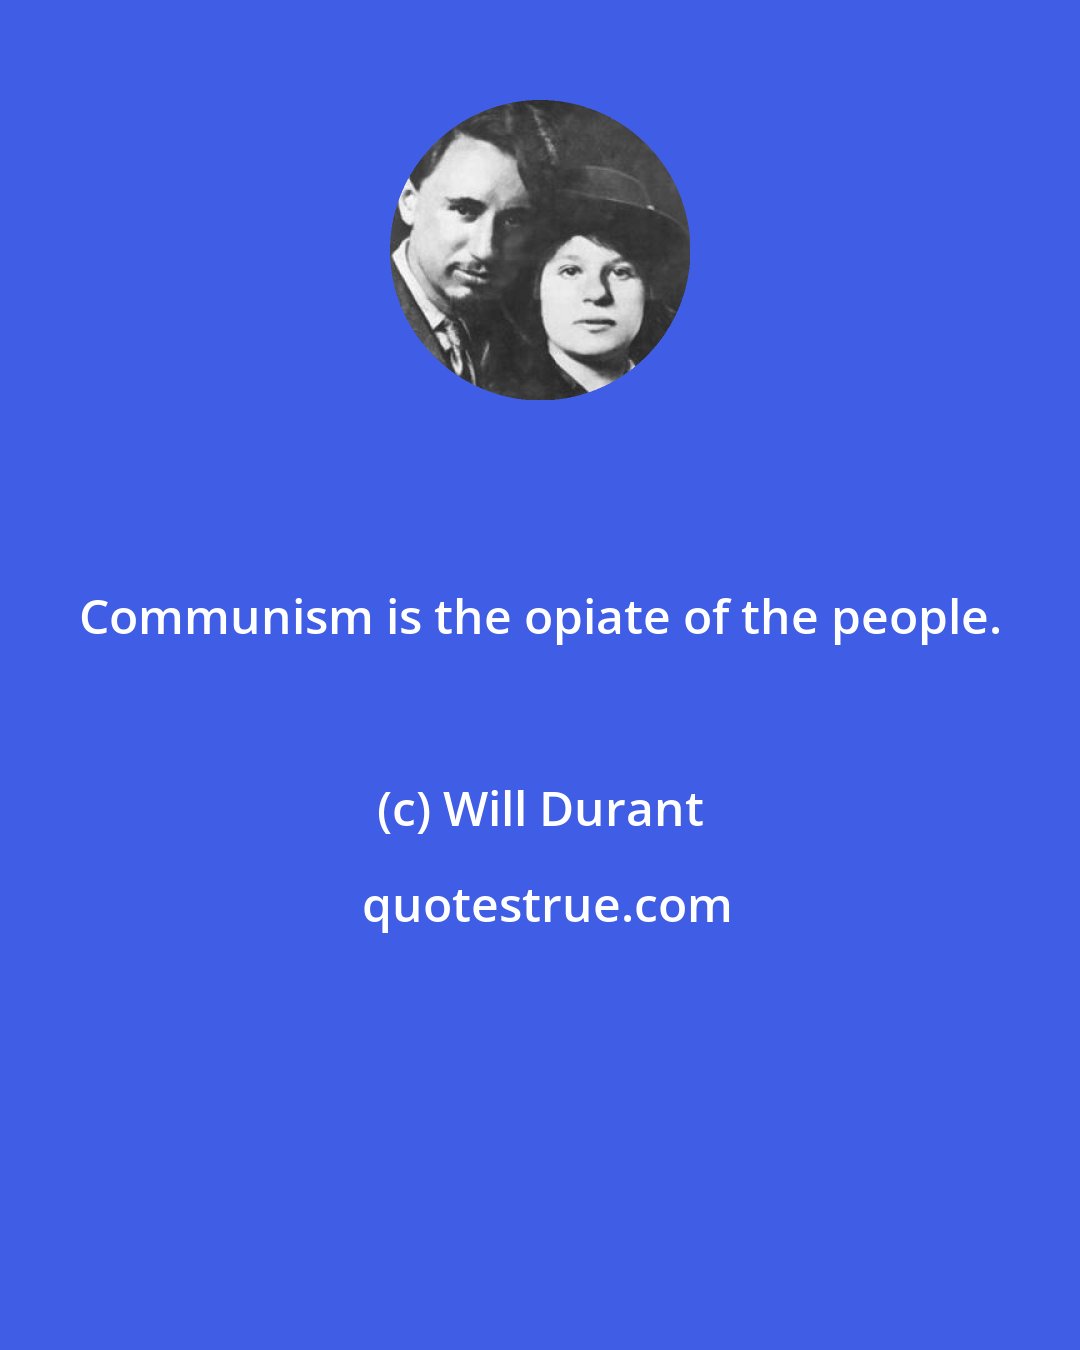 Will Durant: Communism is the opiate of the people.